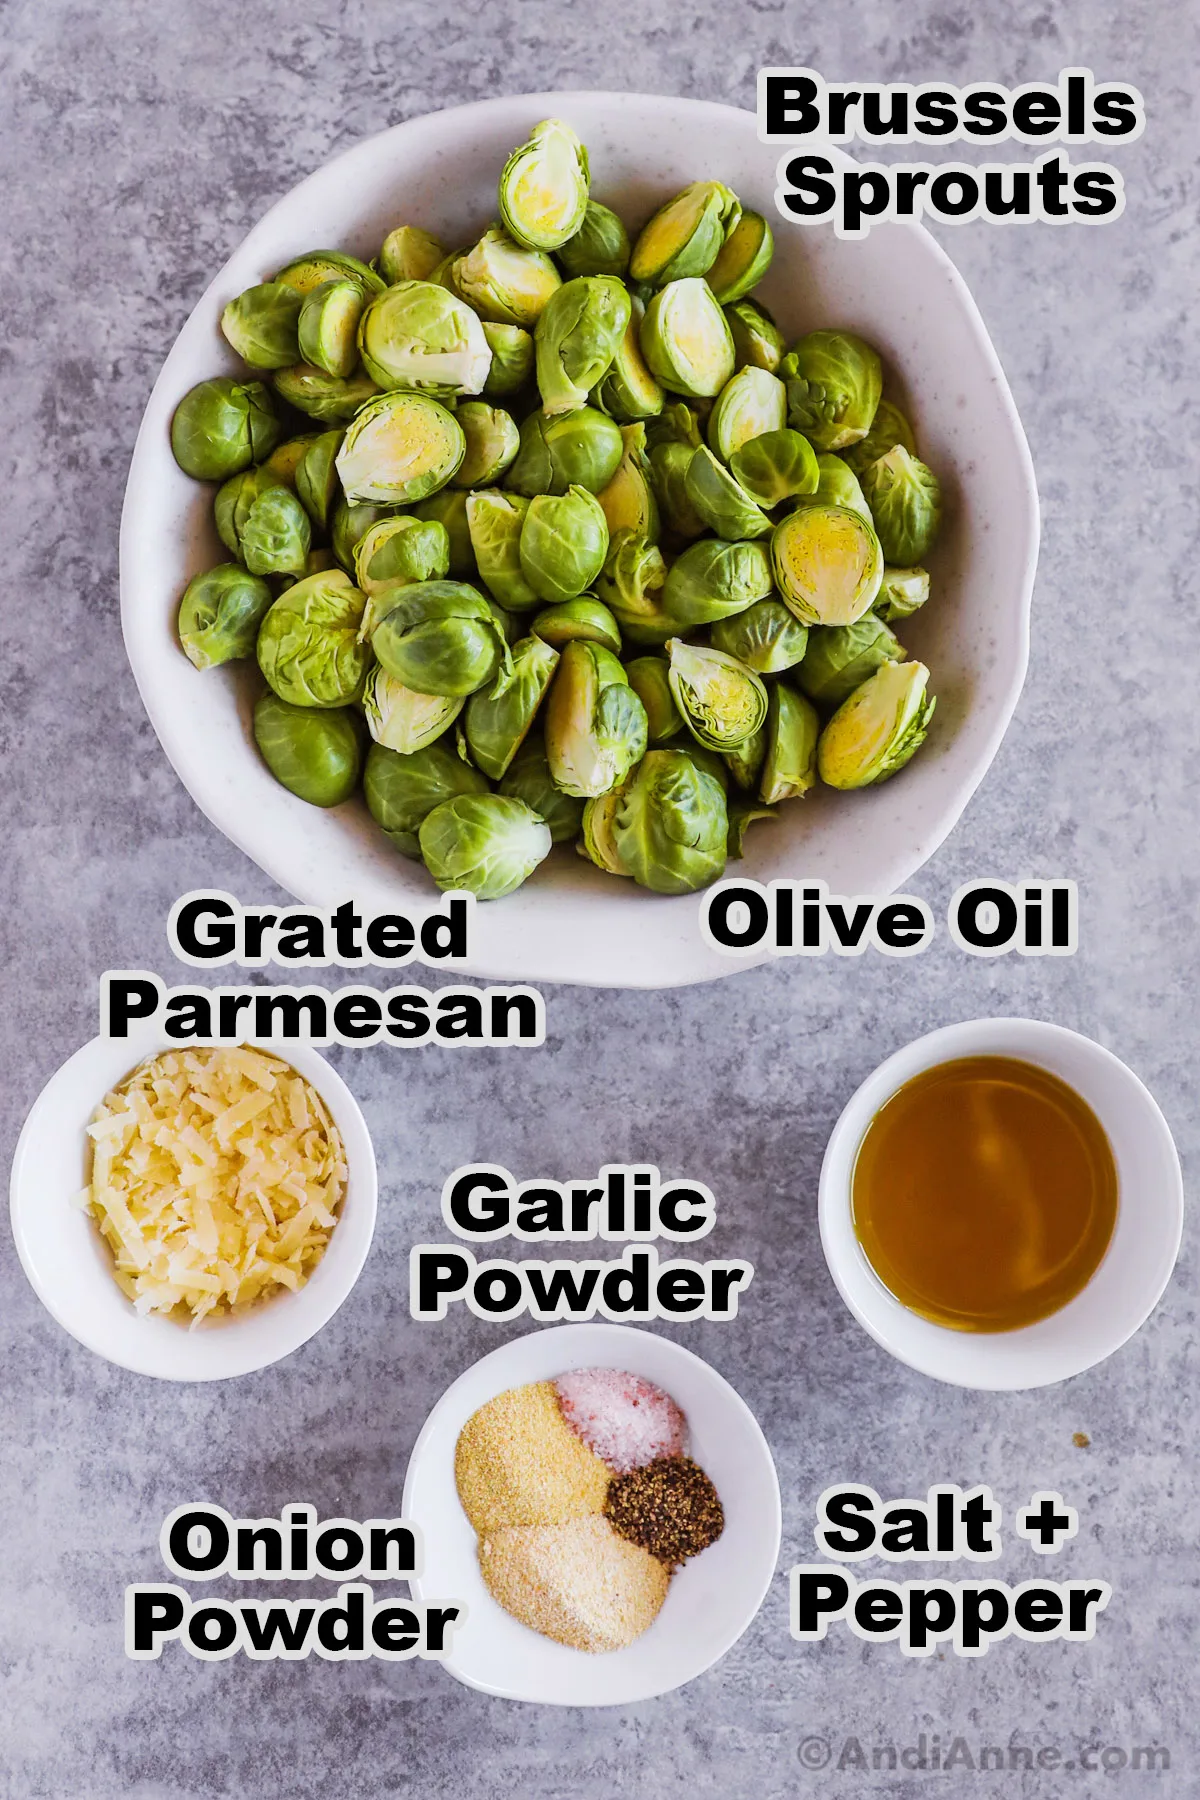 Recipe ingredients in bowls including sliced brussels sprouts, grated parmesan cheese, olive oil, garlic powder, onion powder, salt and pepper.